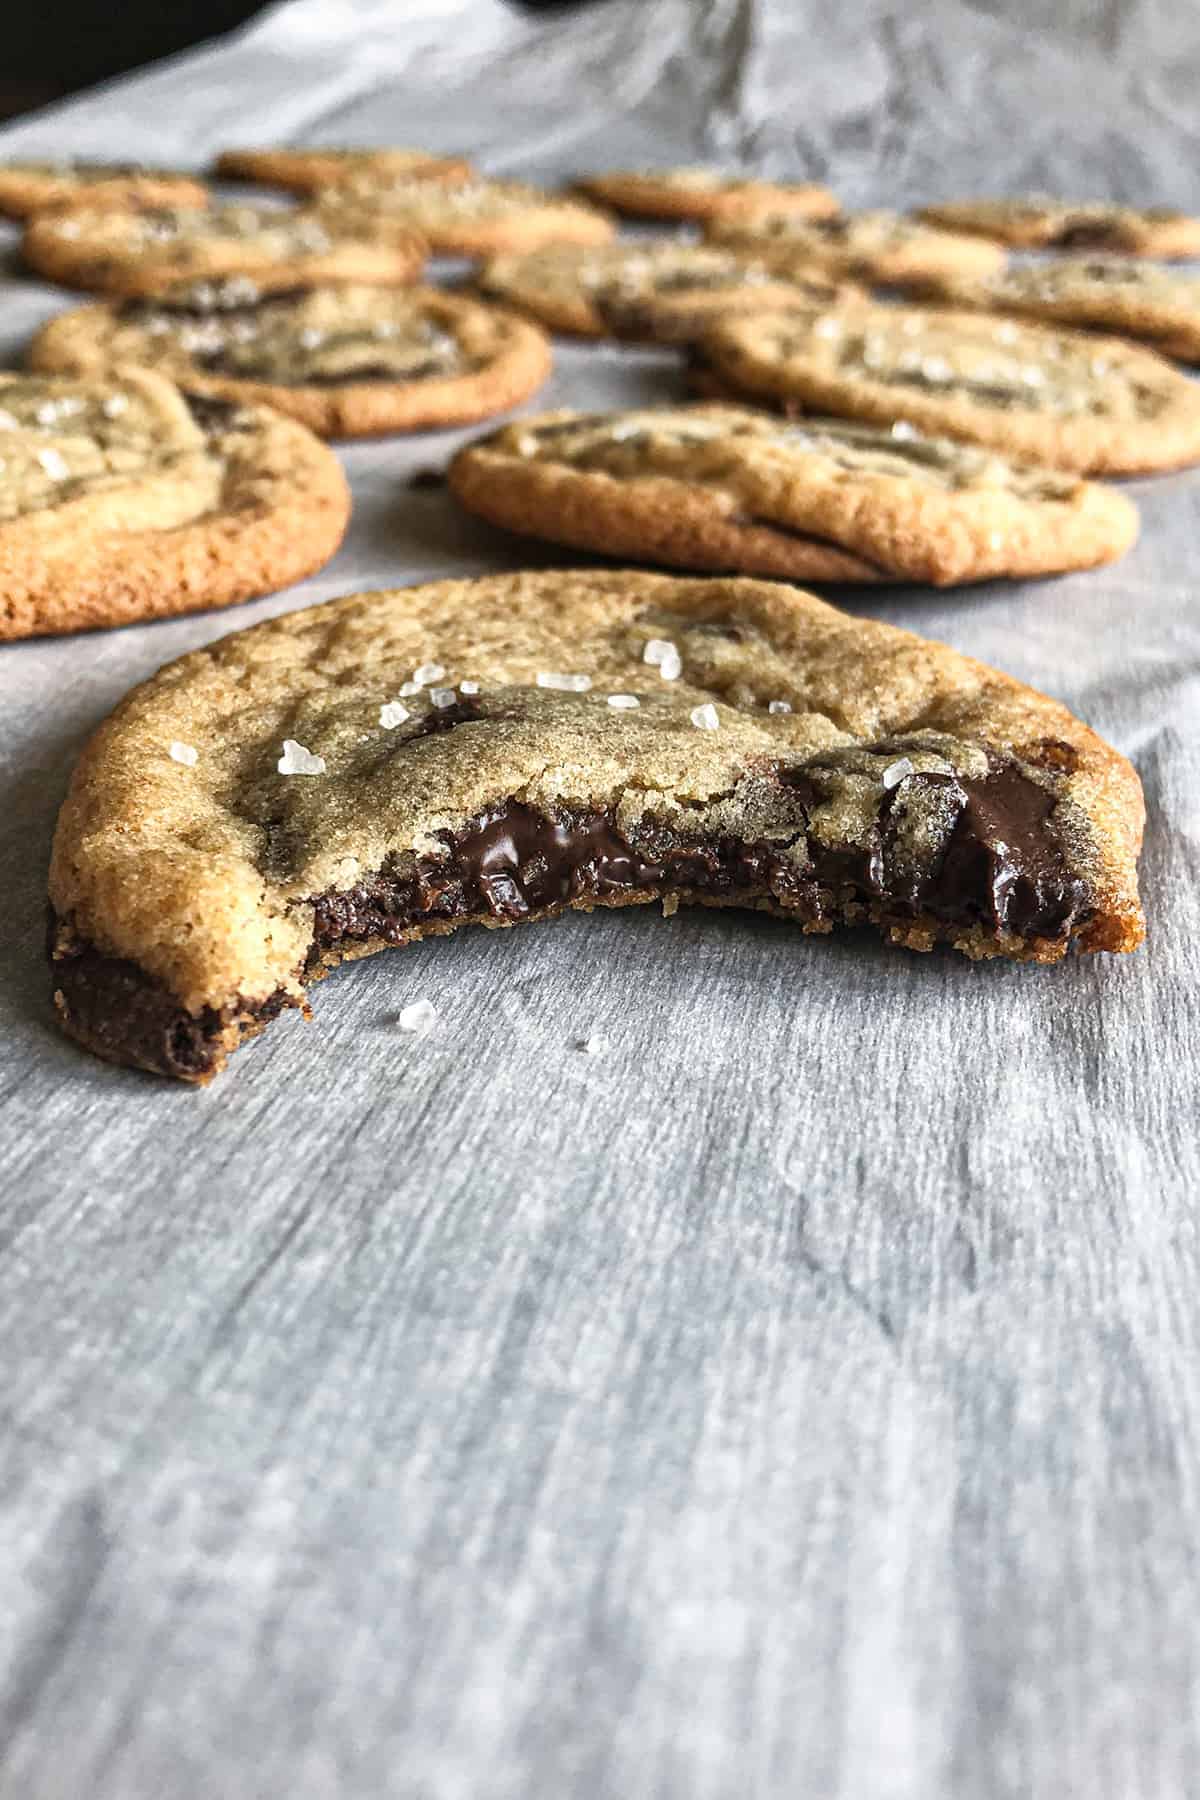 Chocolate chip cookie with a bite out of it